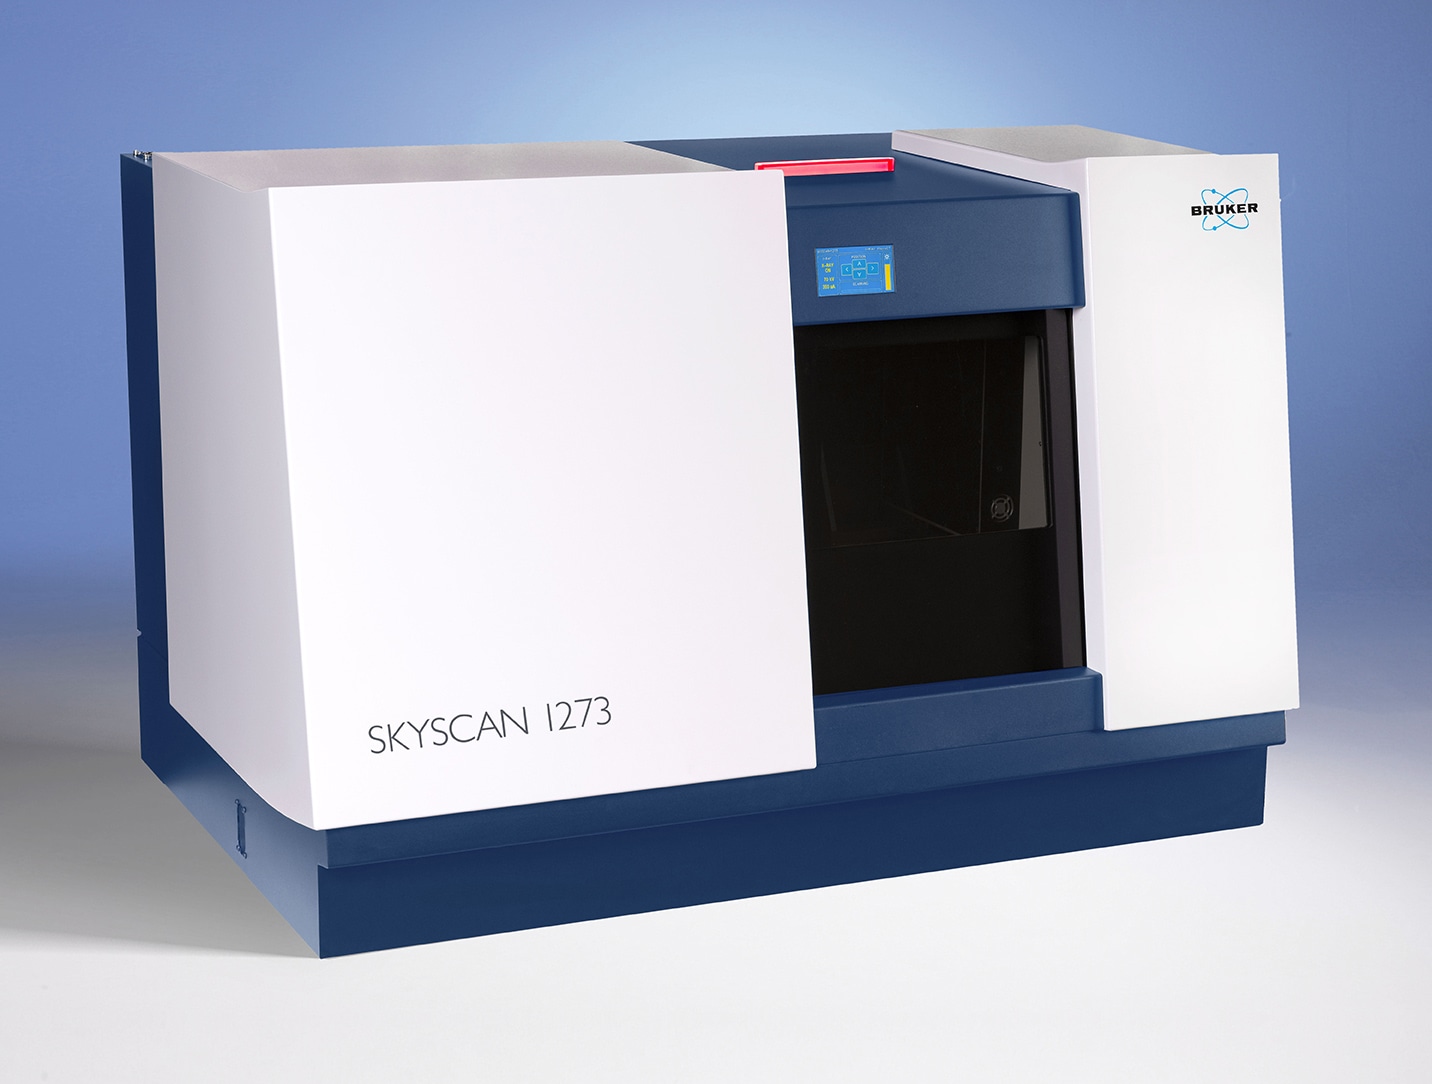 SKYSCAN 1273: Bruker's 3D X-ray Microscope with Micro-CT Technology